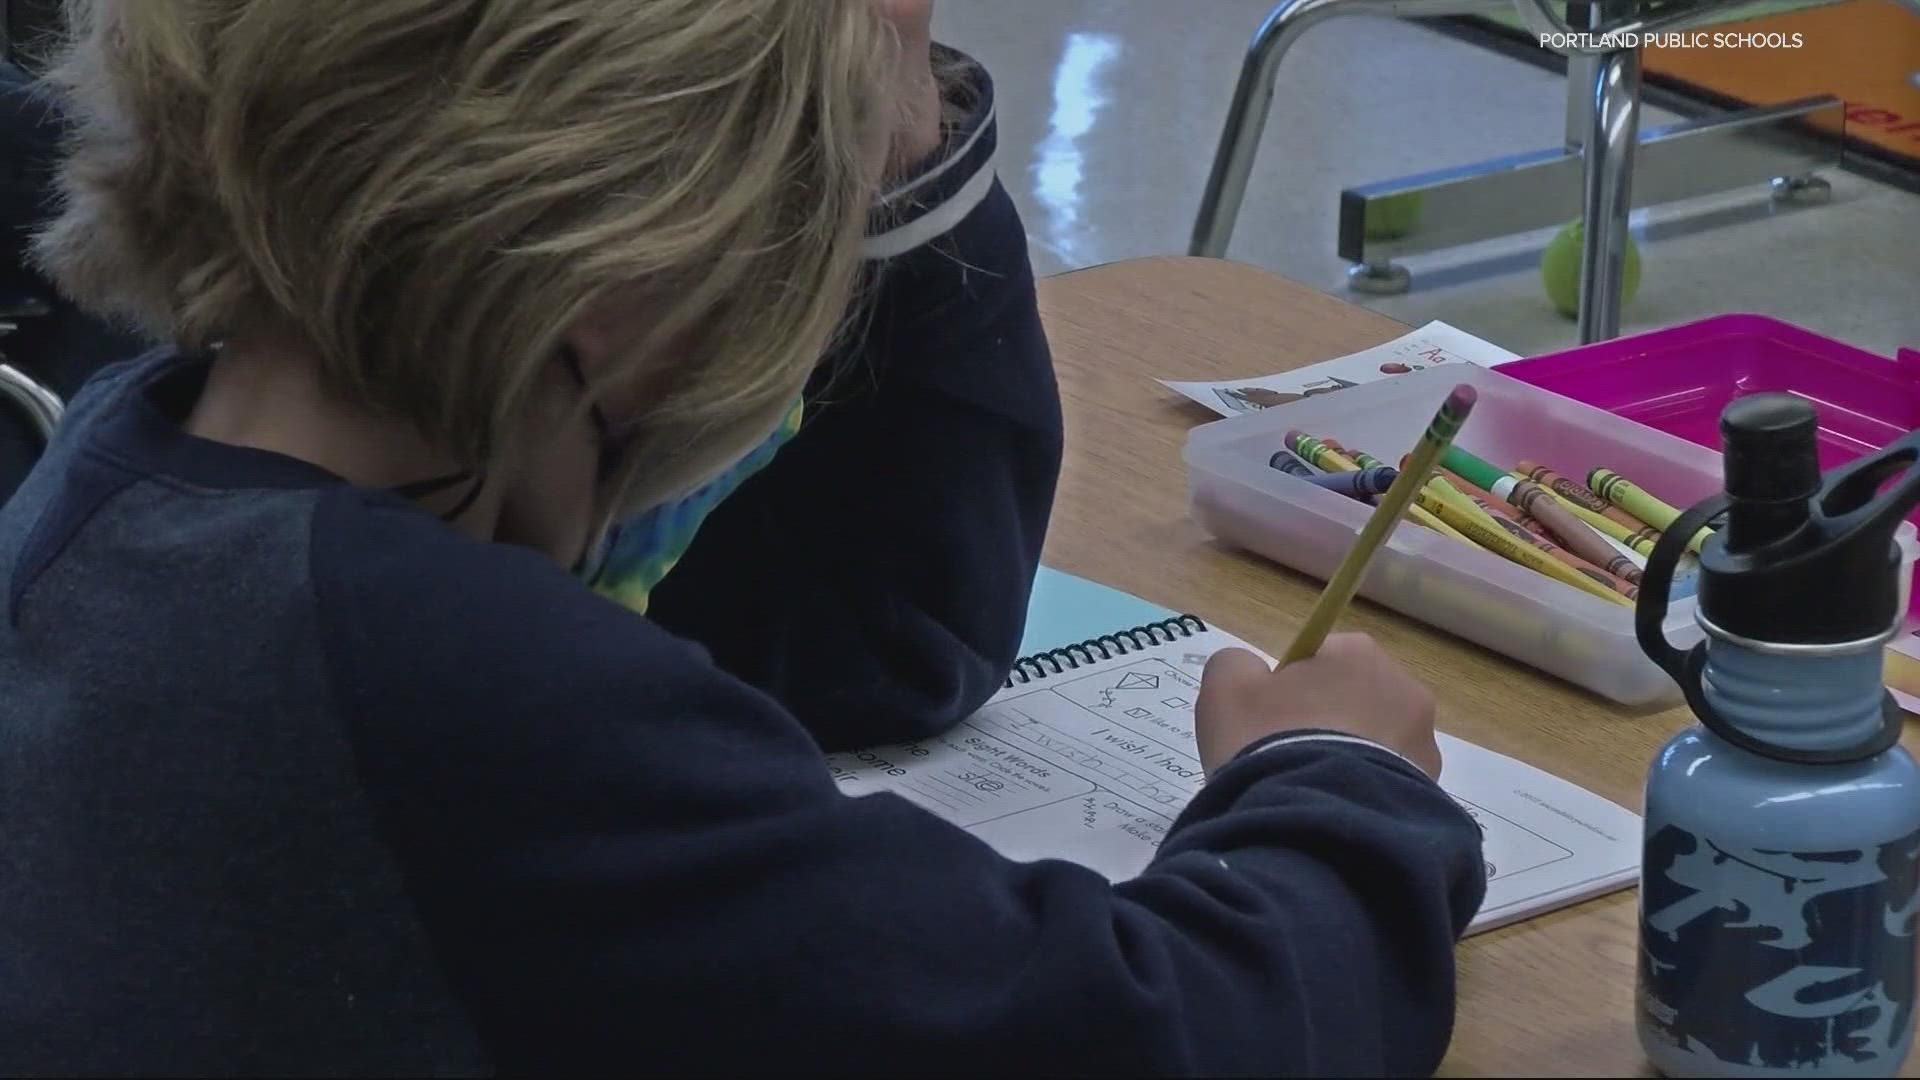 The move comes because enrollment has dropped in the district. KGW's Christine Pitawanich explains what that will mean for teachers and their students.